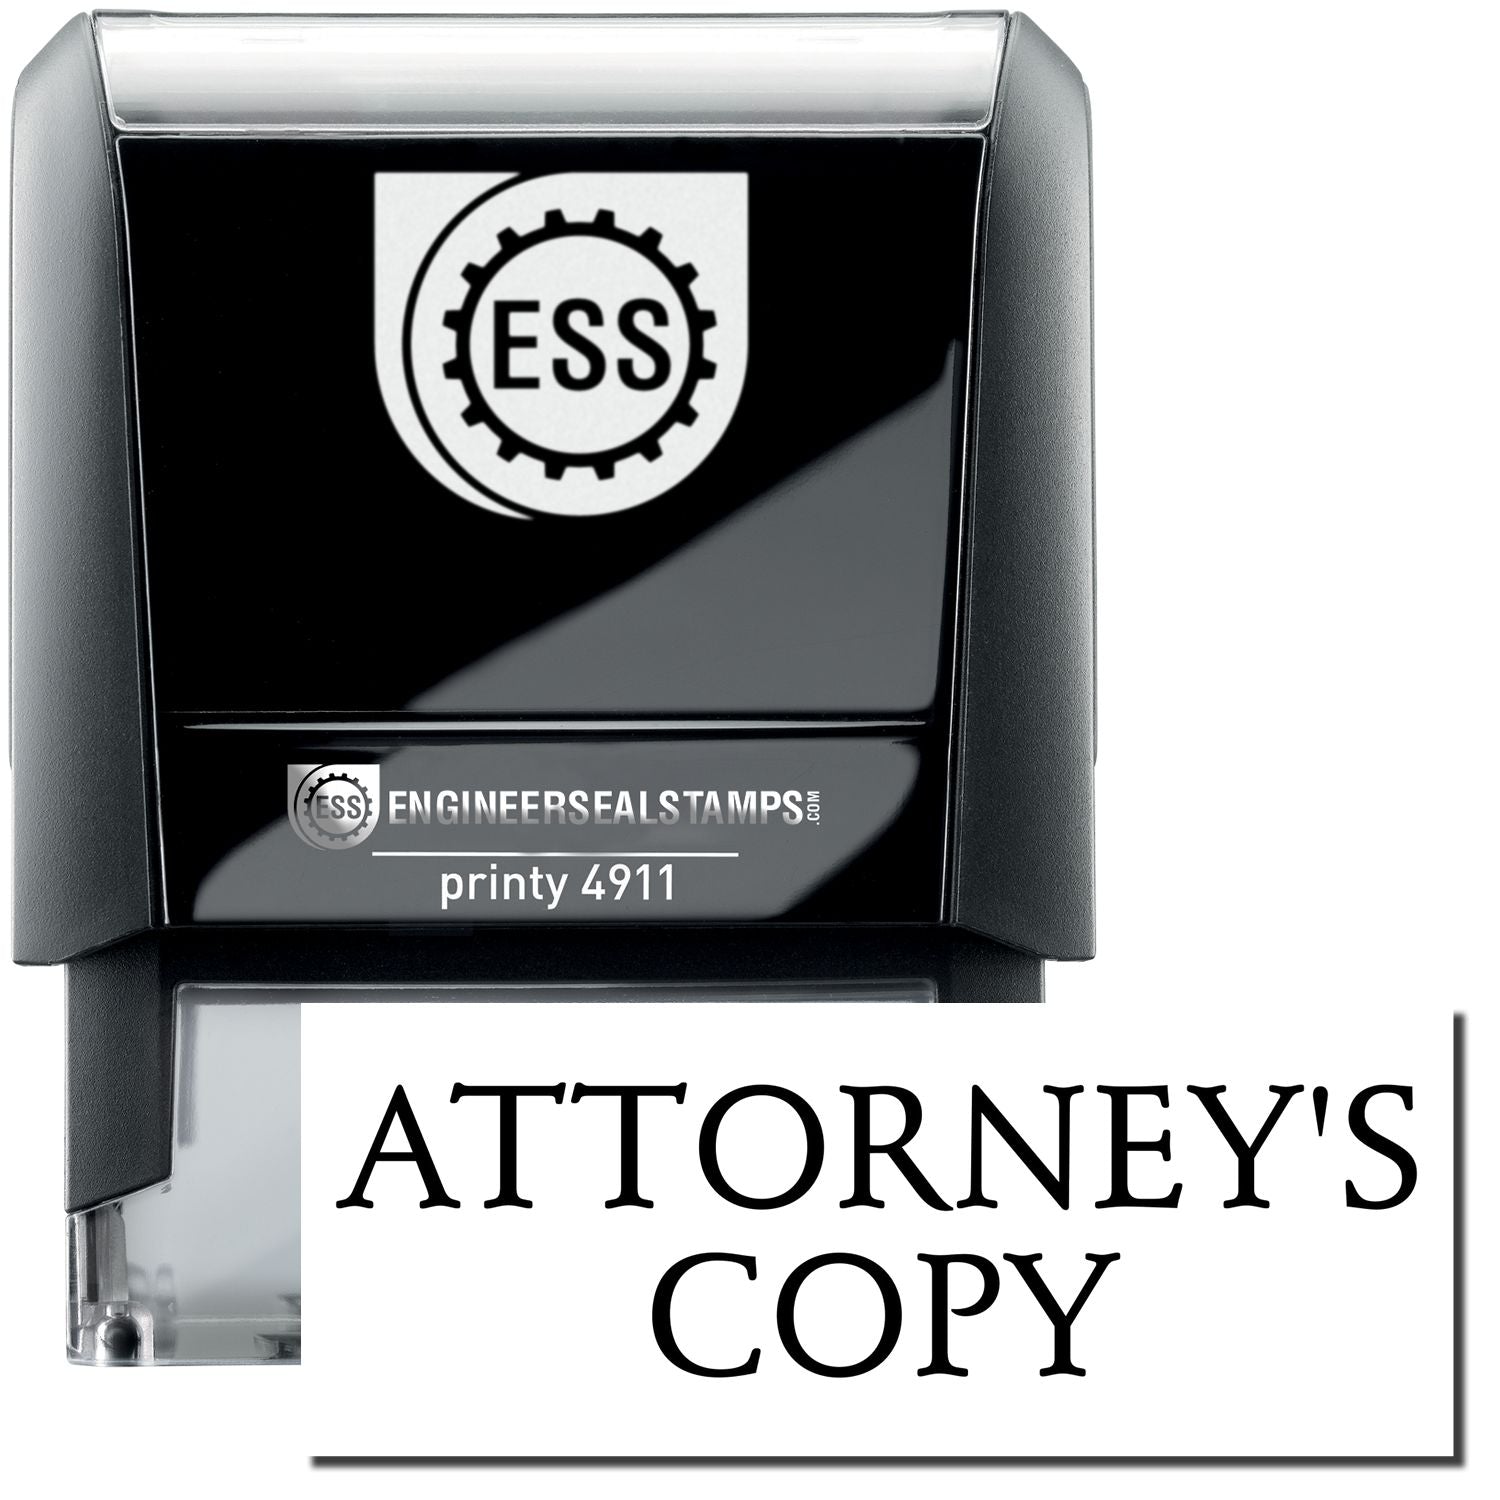 A self-inking stamp with a stamped image showing how the text "ATTORNEY'S COPY" is displayed after stamping.